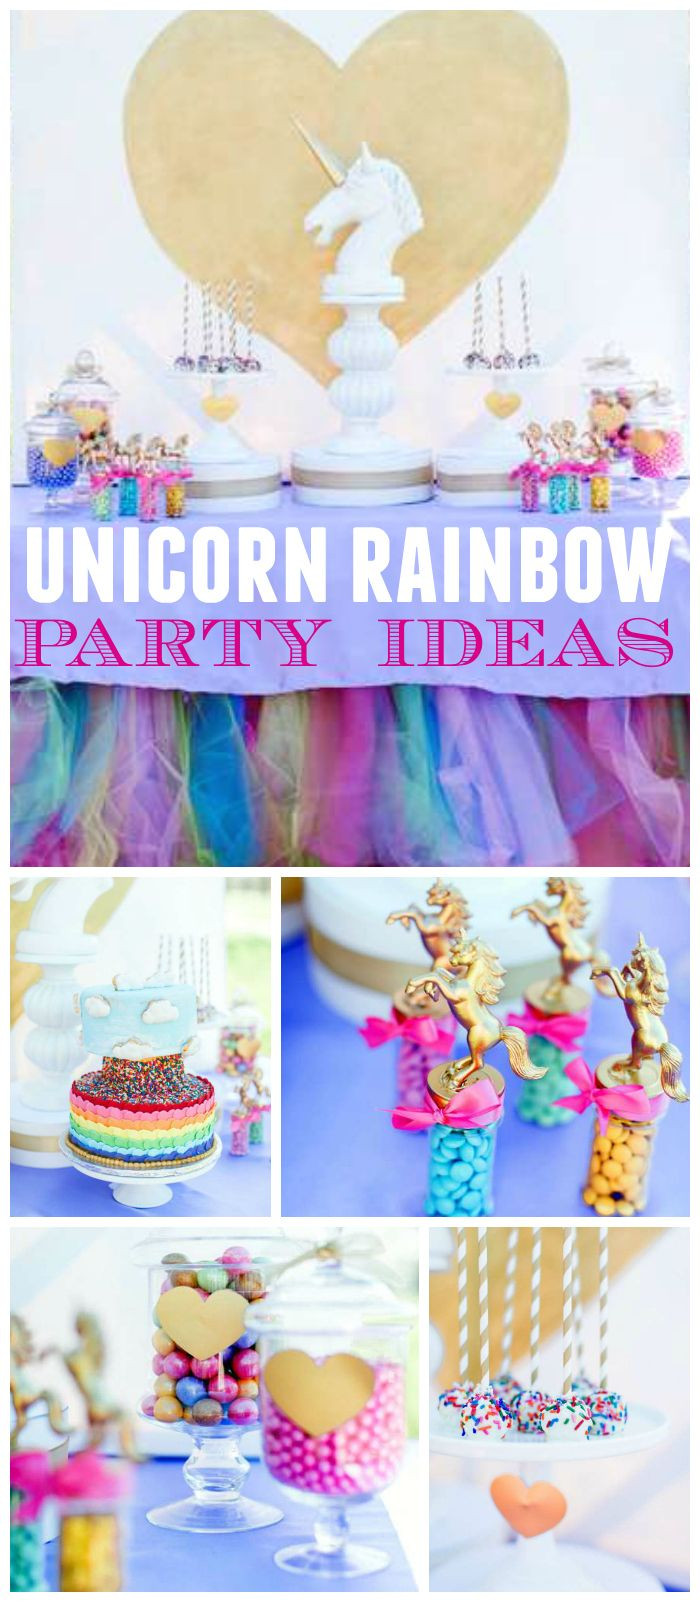 Unicorn And Rainbow Party Ideas
 77 best images about Gwen s first birthday on Pinterest